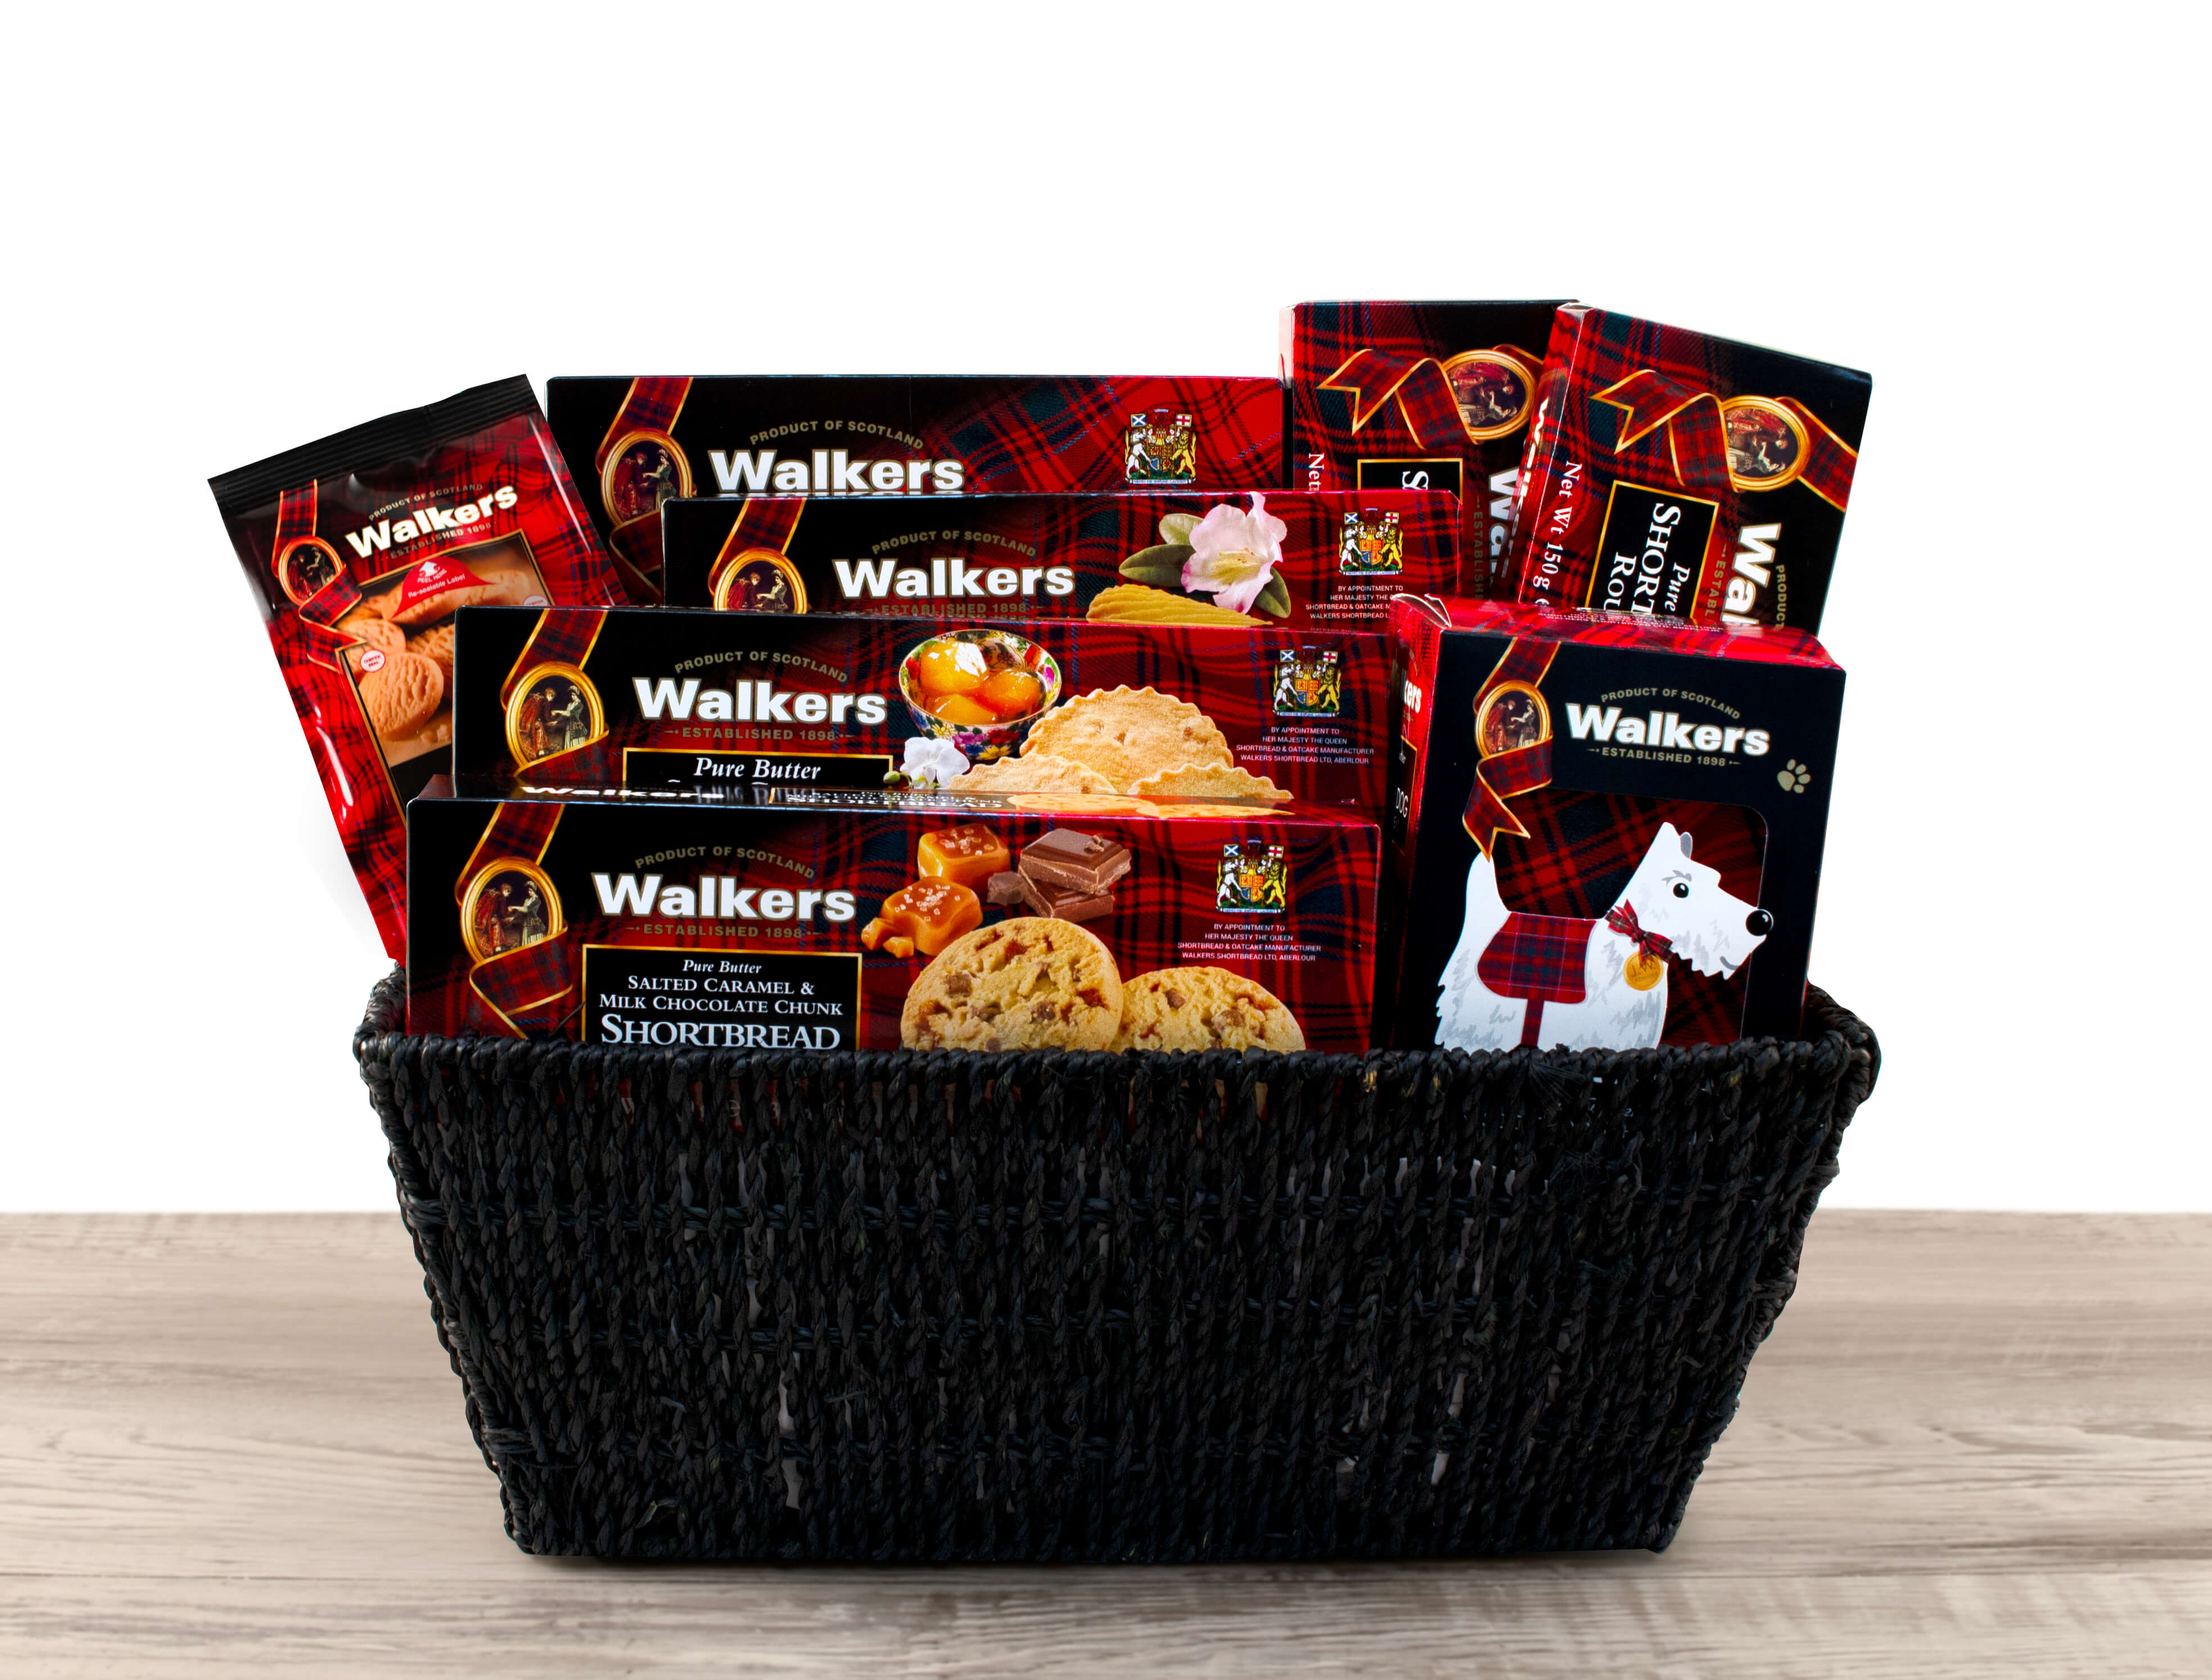 A basket full of various Walker's Shortbread product boxes